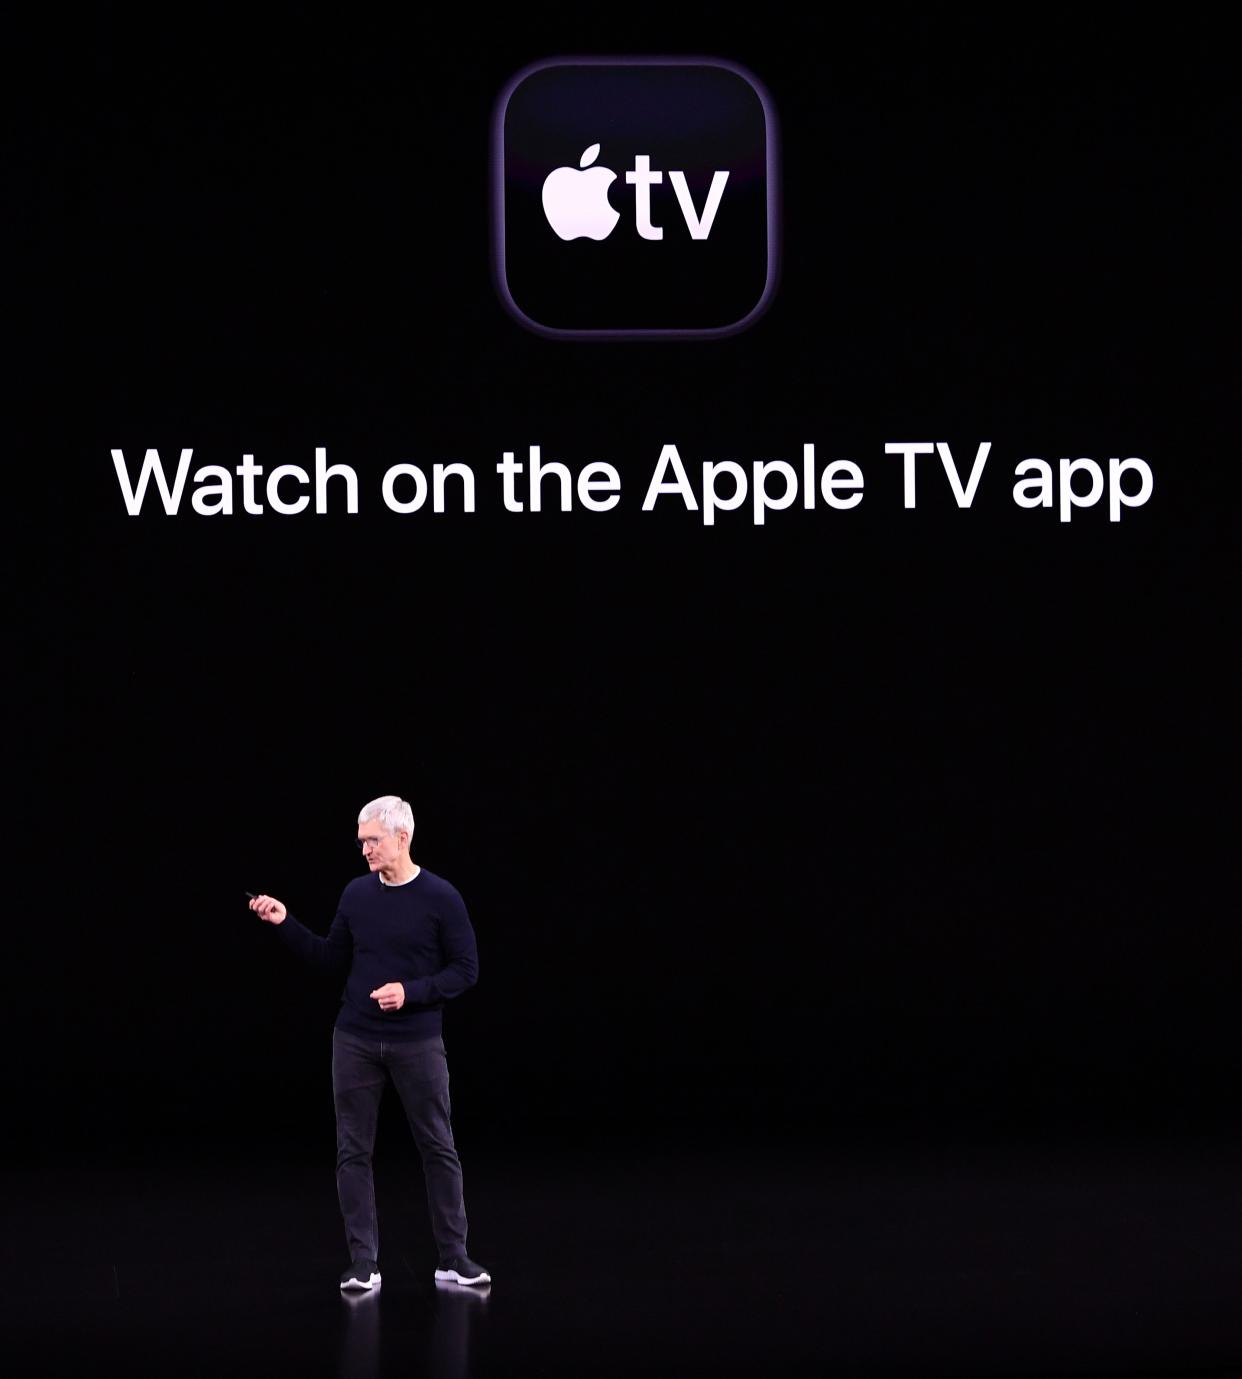 Apple CEO Tim Cook introduces Apple TV plus during a product launch event. (Photo by Josh Edelson/AFP/Getty Images)